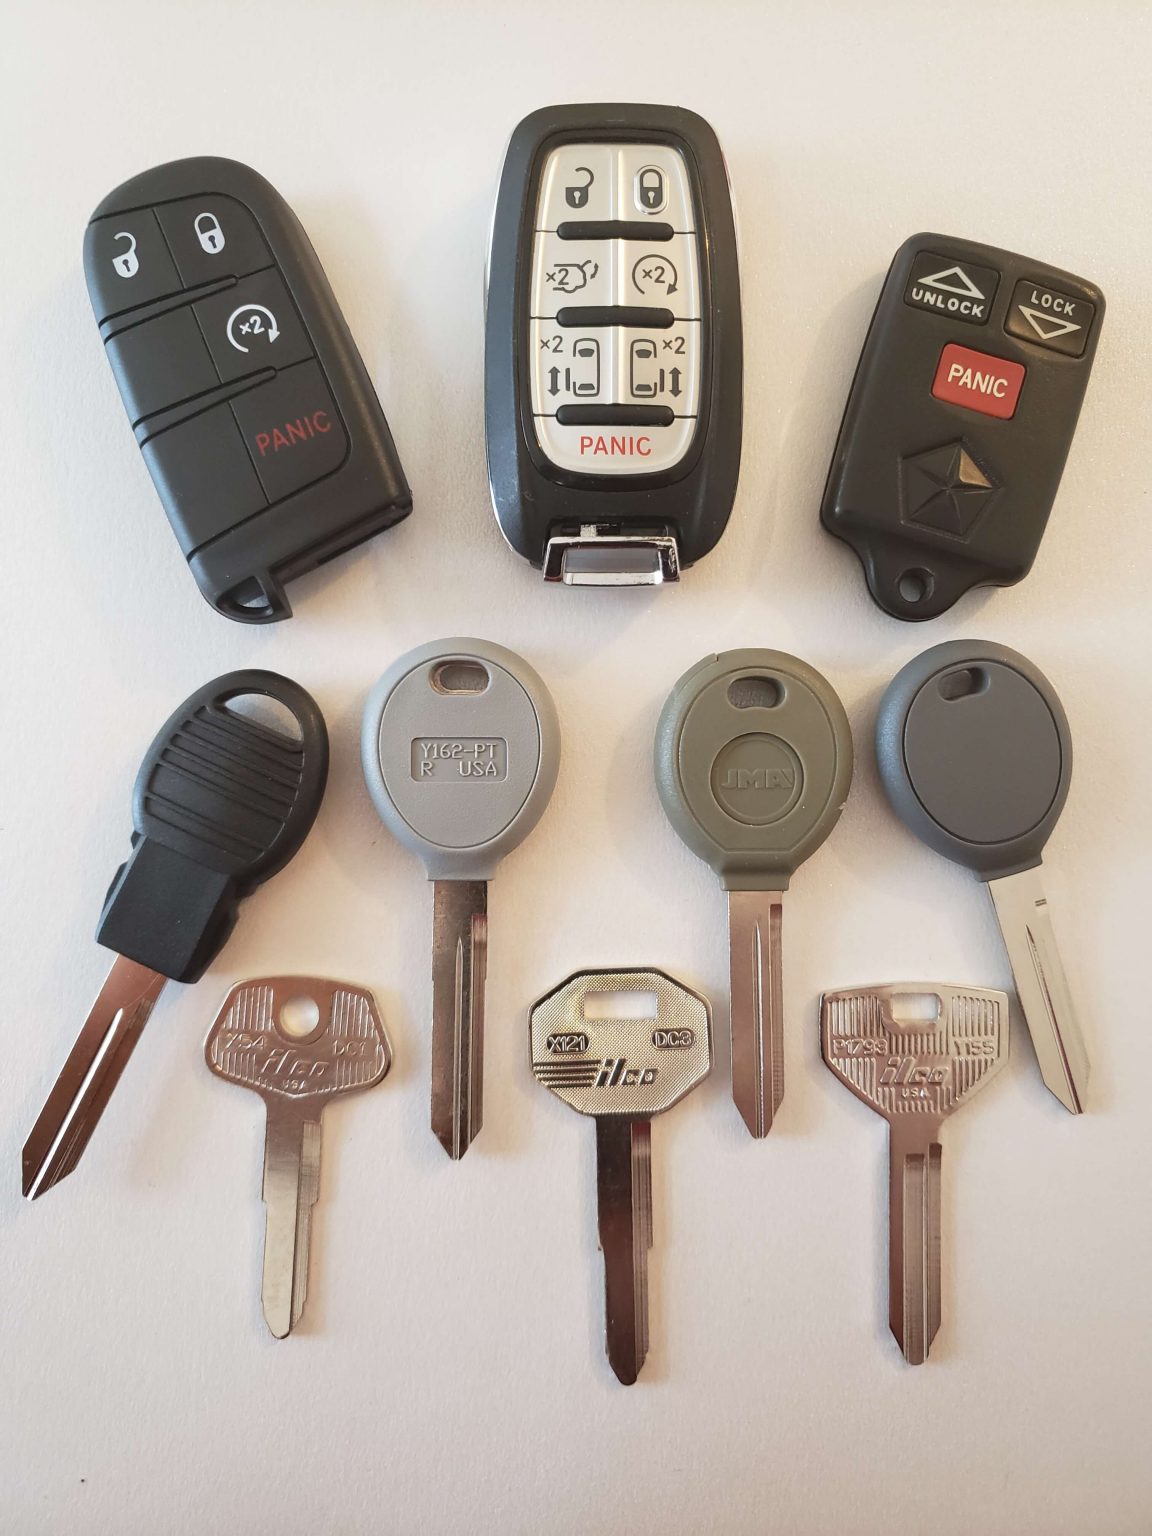 Jeep Car Key Replacement - What To Do, Options, Costs, Tips & More